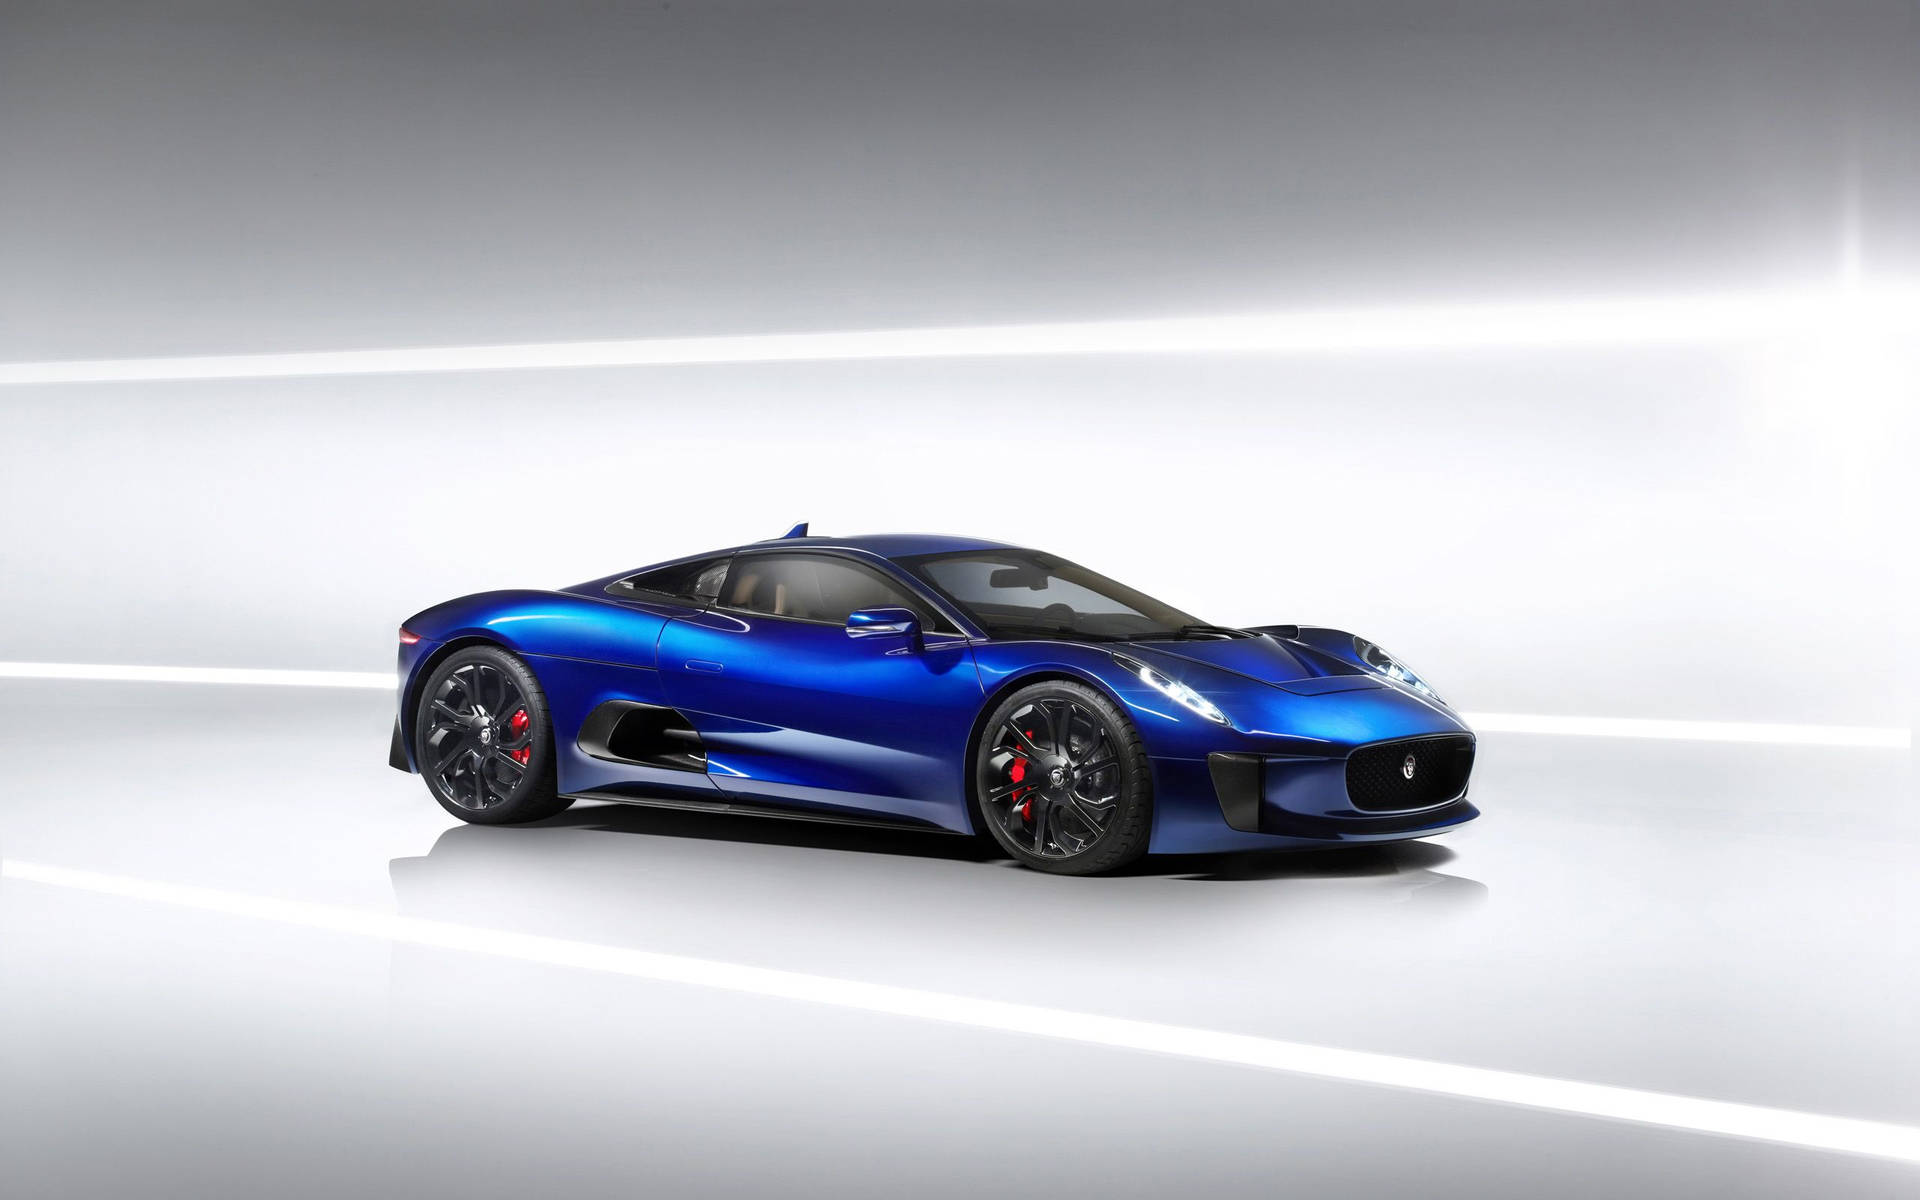 High Performance And Style On The Road In The Electric Blue Jaguar